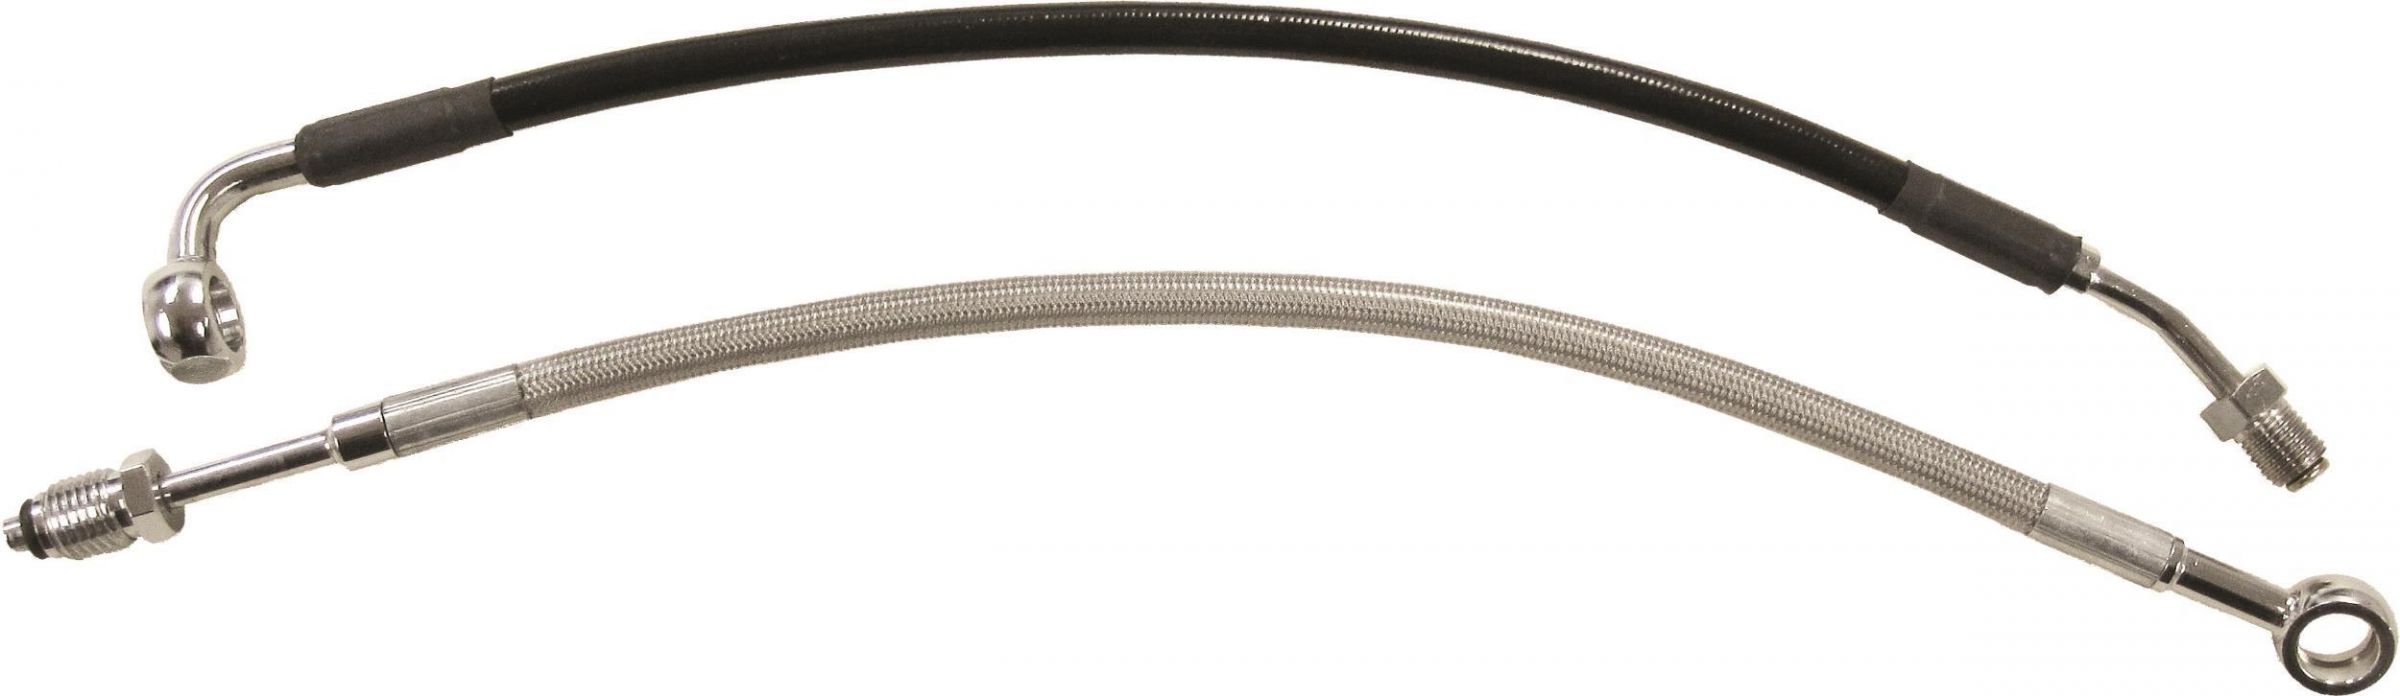 86O9-GOODRIDG-HD0005-1CCH-2 Stainless Steel Braided Hydraulic Clutch Line Kit - 2in. Over Stock - Clear Coated